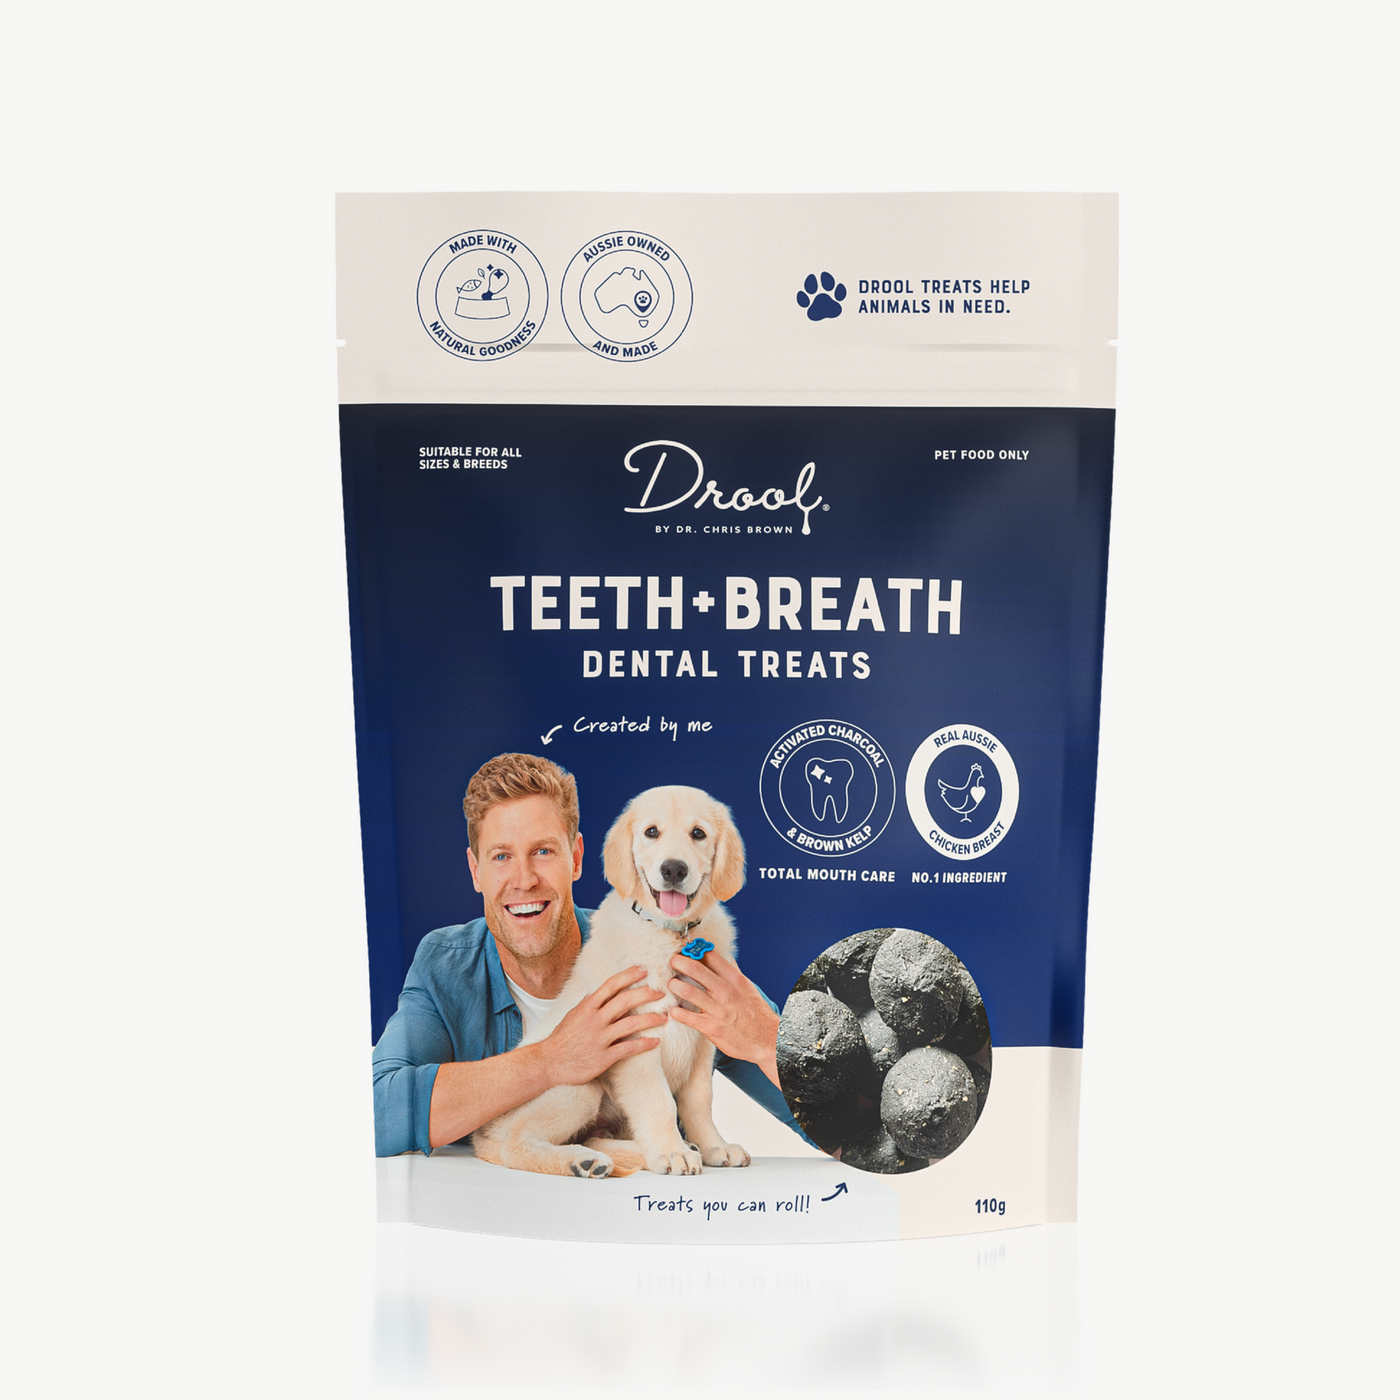 Drool By Dr Chris Brown Teeth and Breath Dog Treat 110g